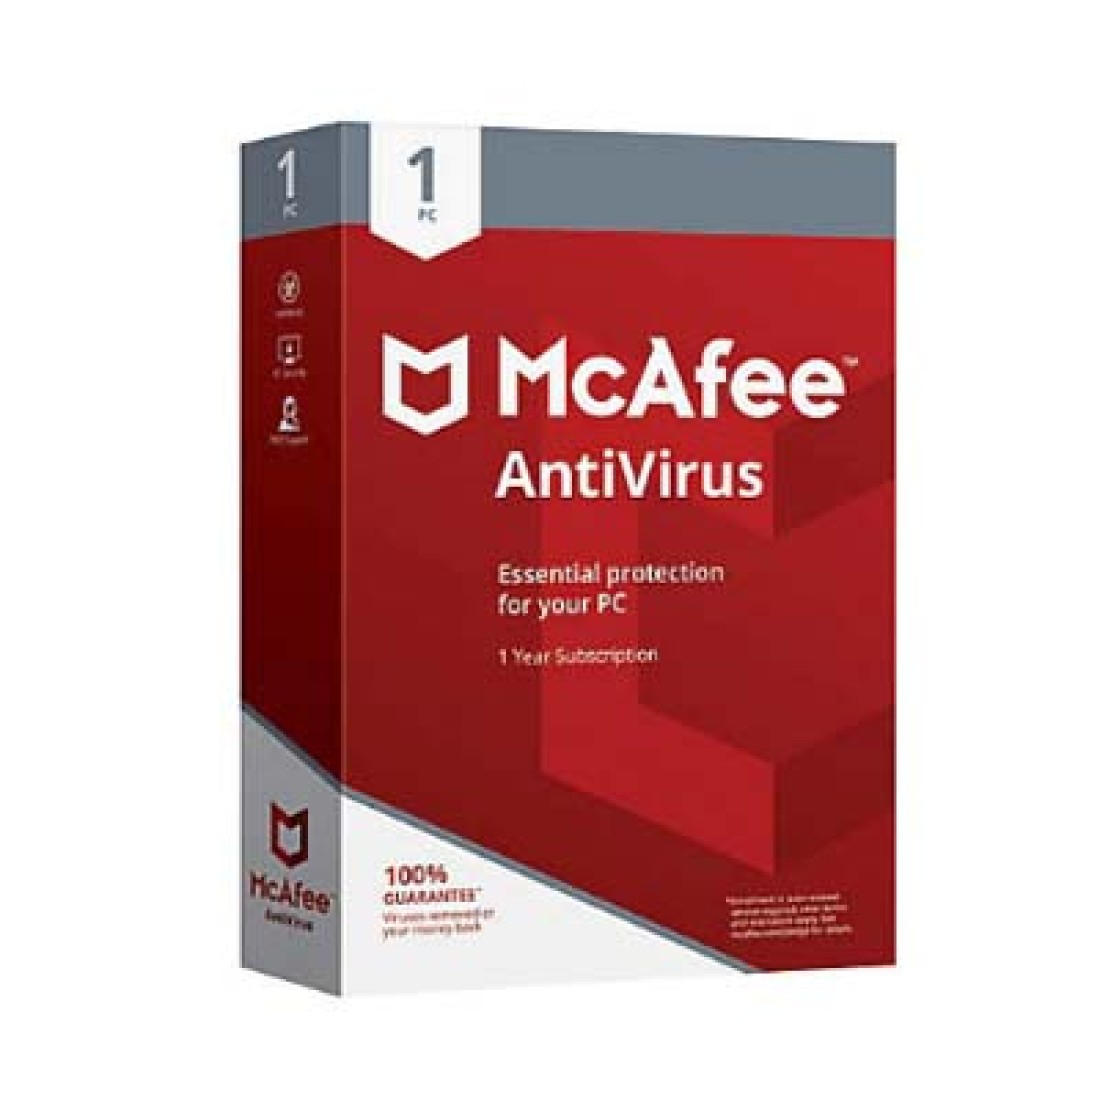 mcafee antivirus for tablets